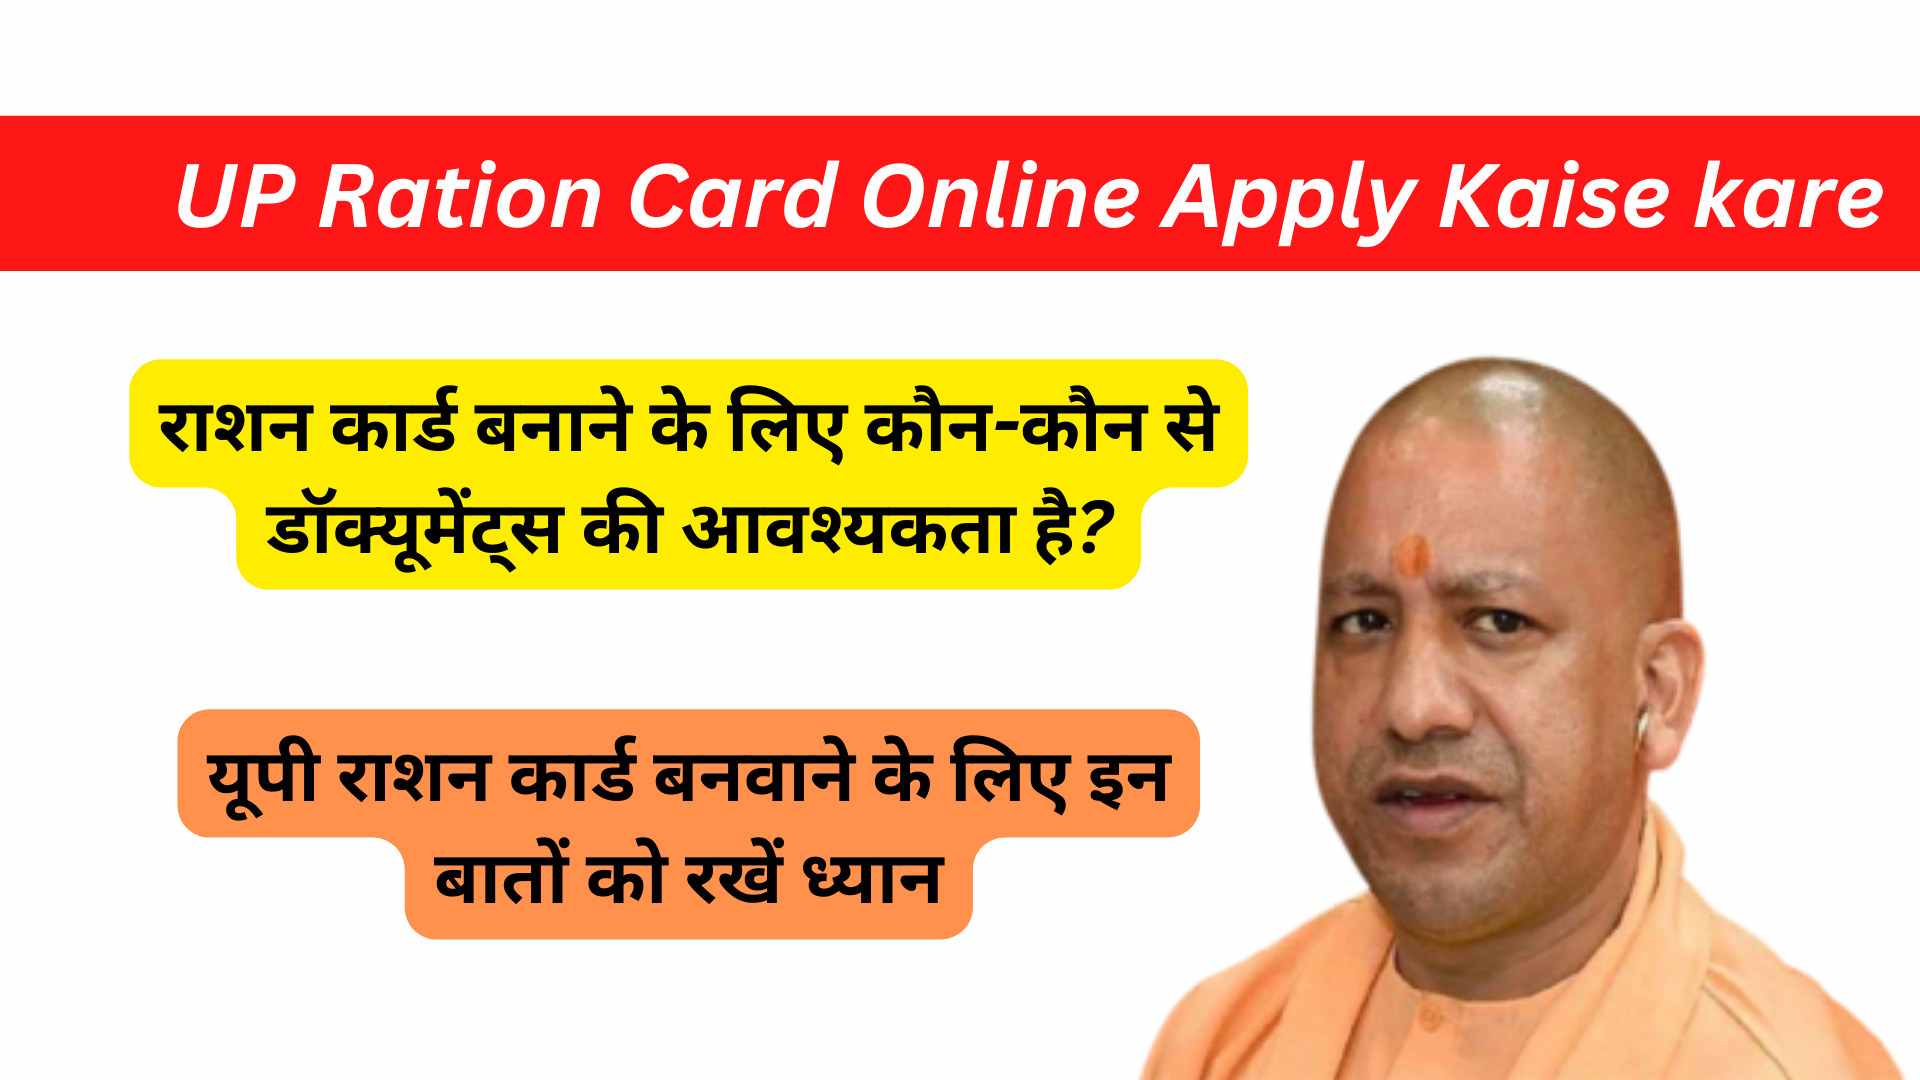 UP Ration Card 2022 Online Apply Kaise kare